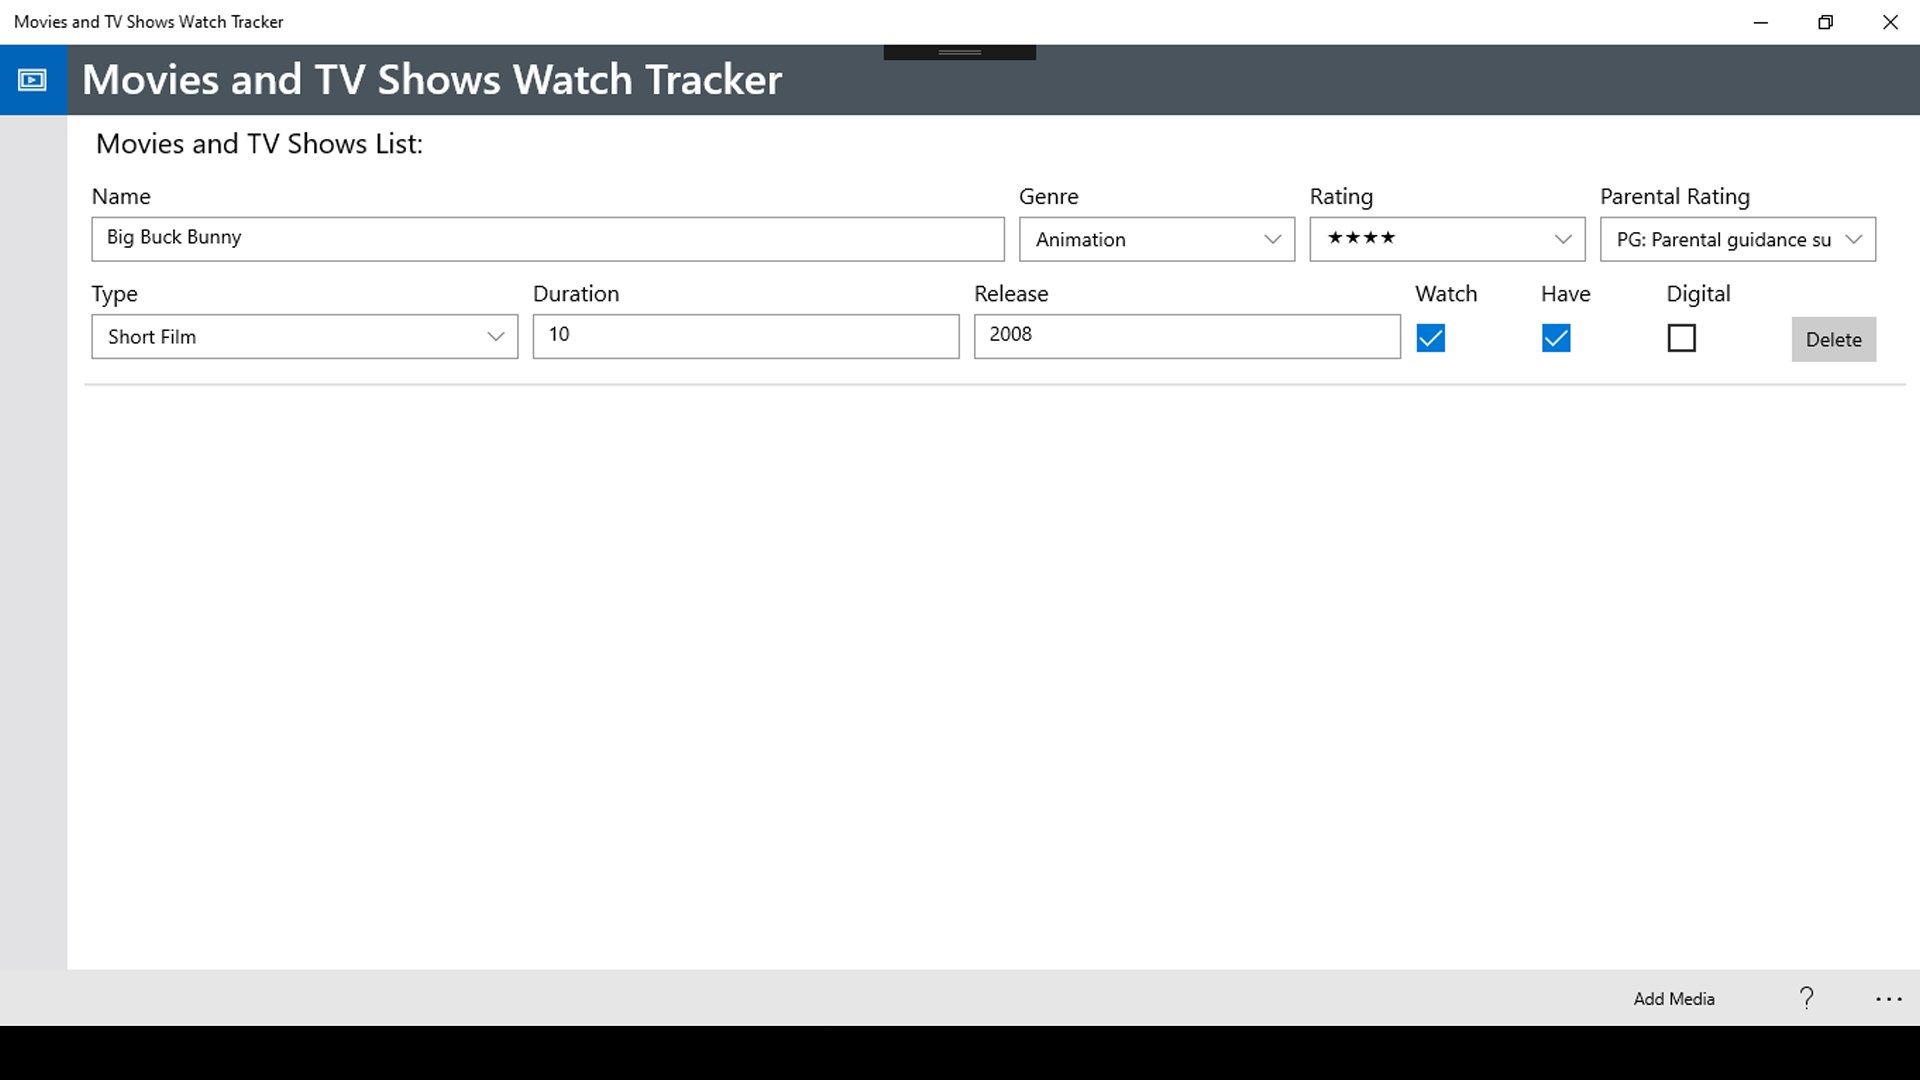 Movies and TV Shows Watch Tracker